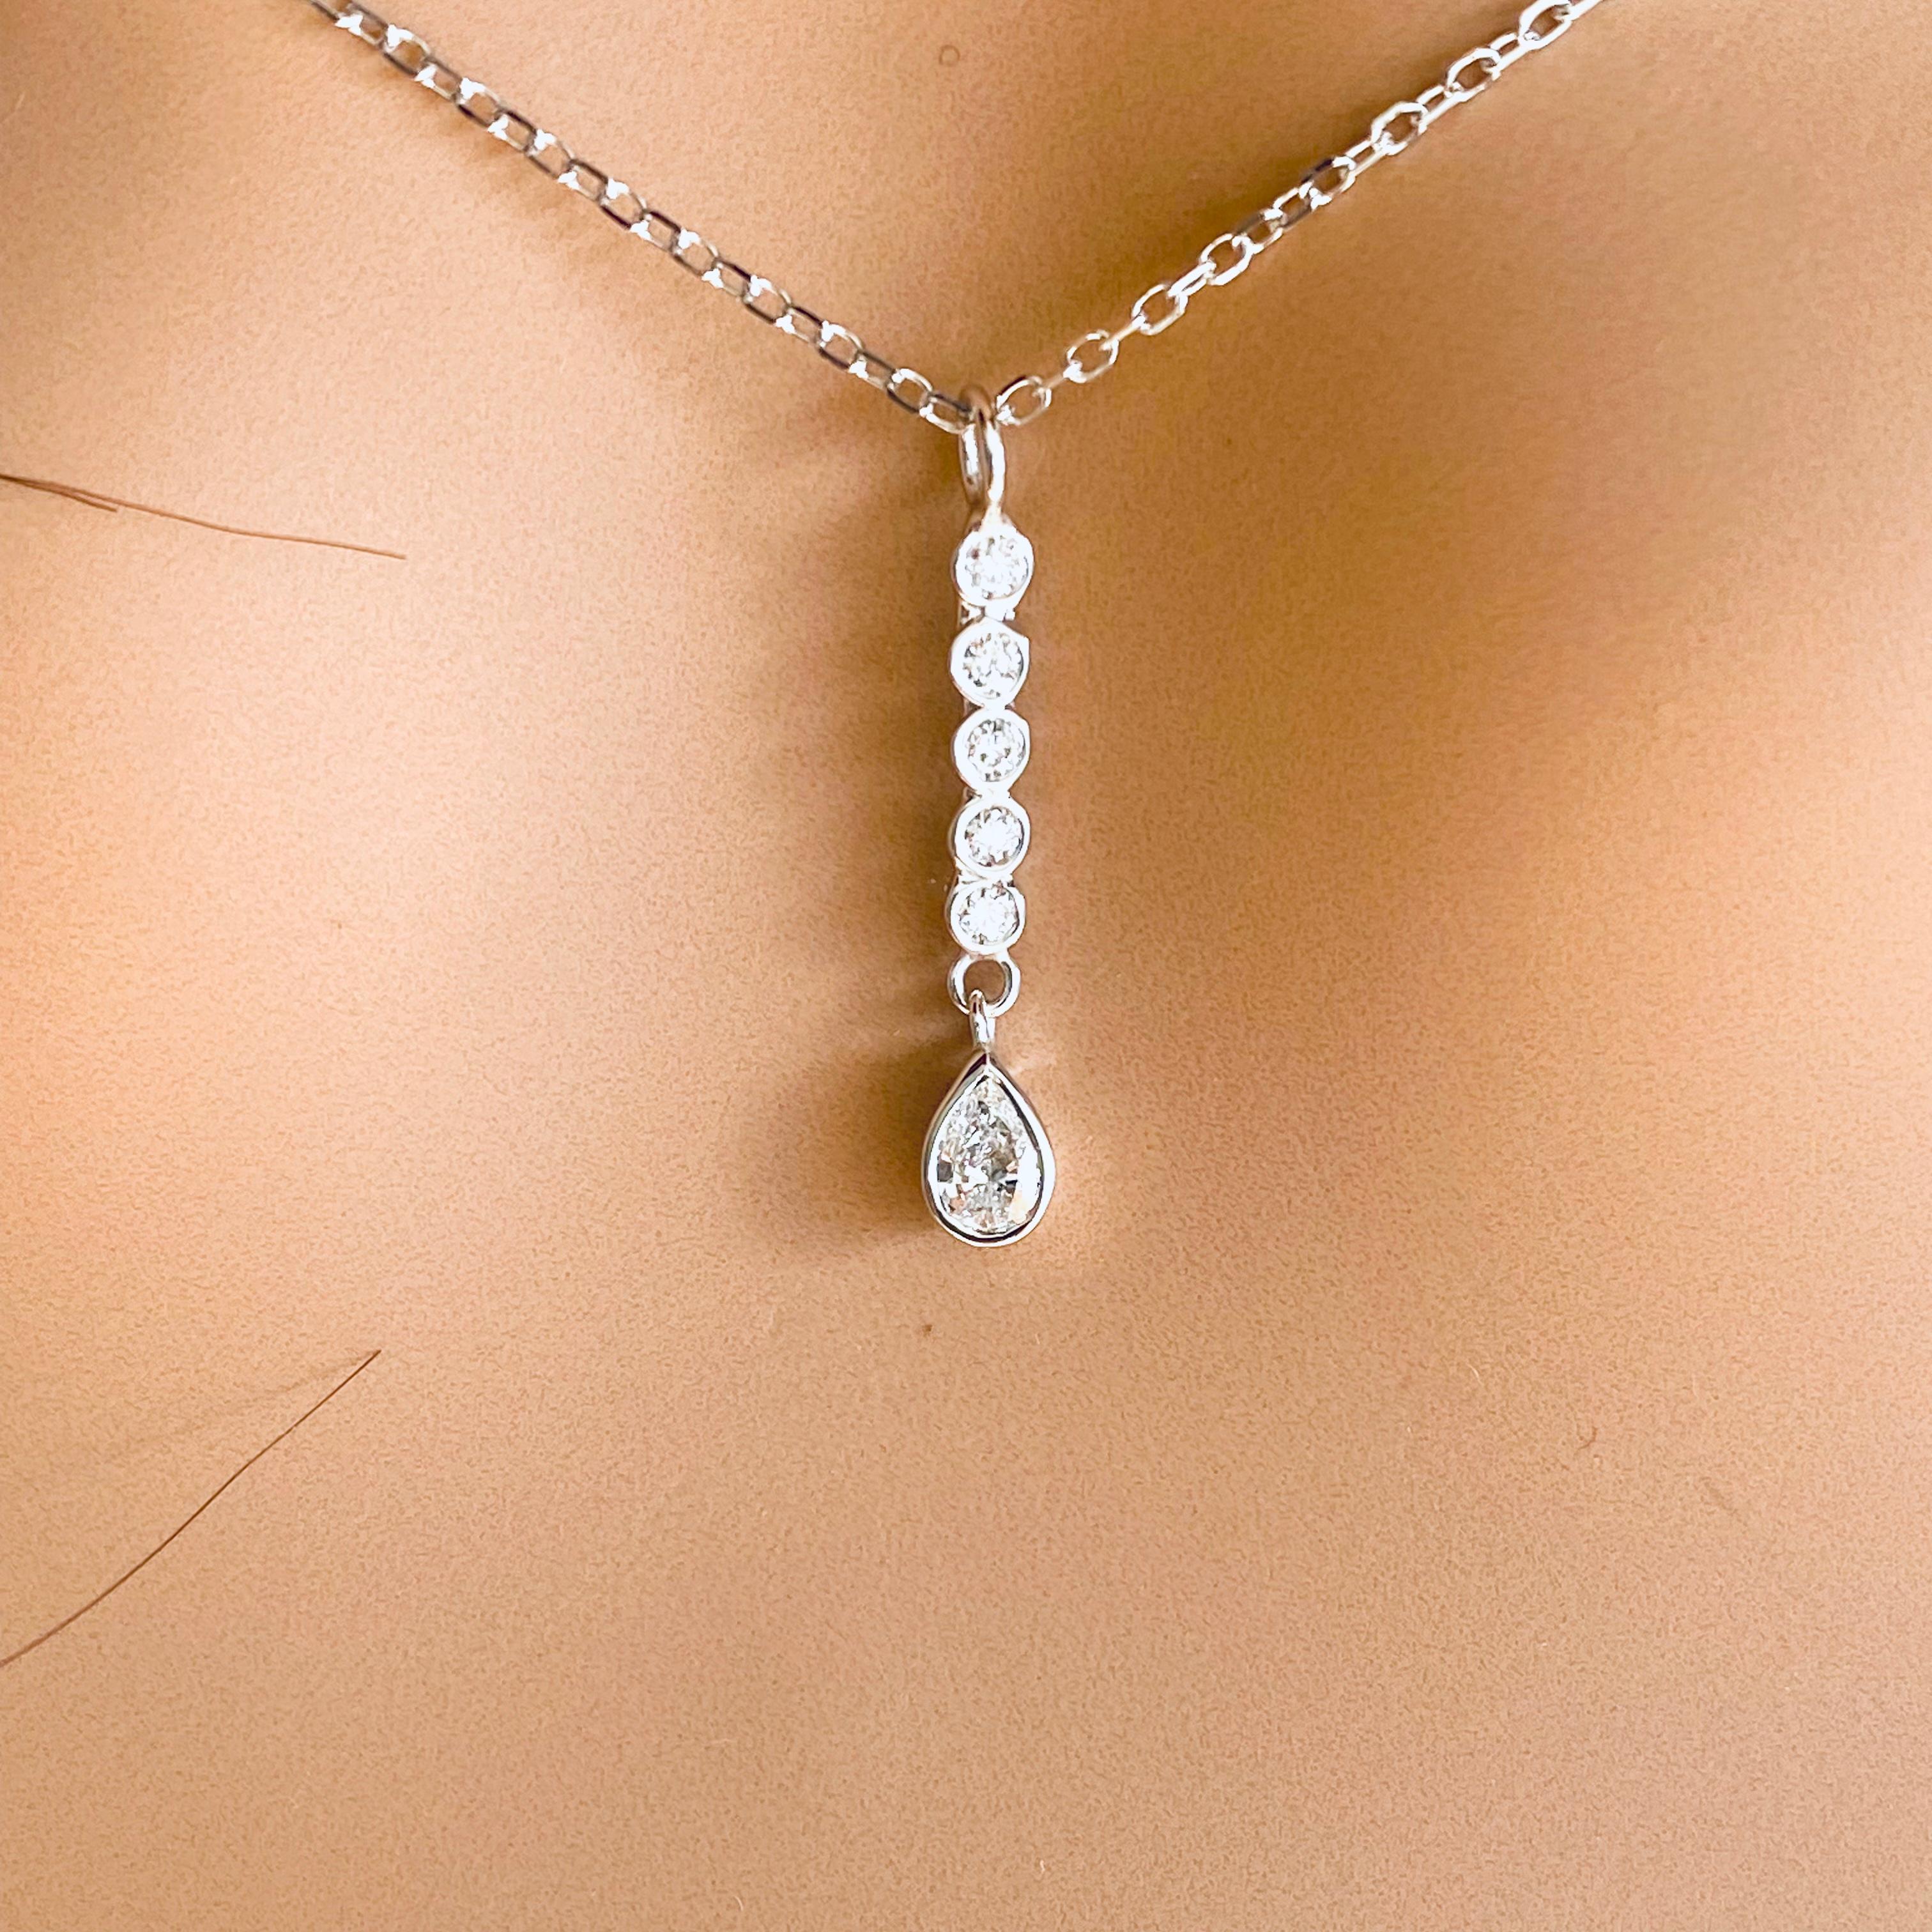 Pear Cut Pear Shaped Diamond and Diamond Lariat Drop White Gold Necklace Pendant